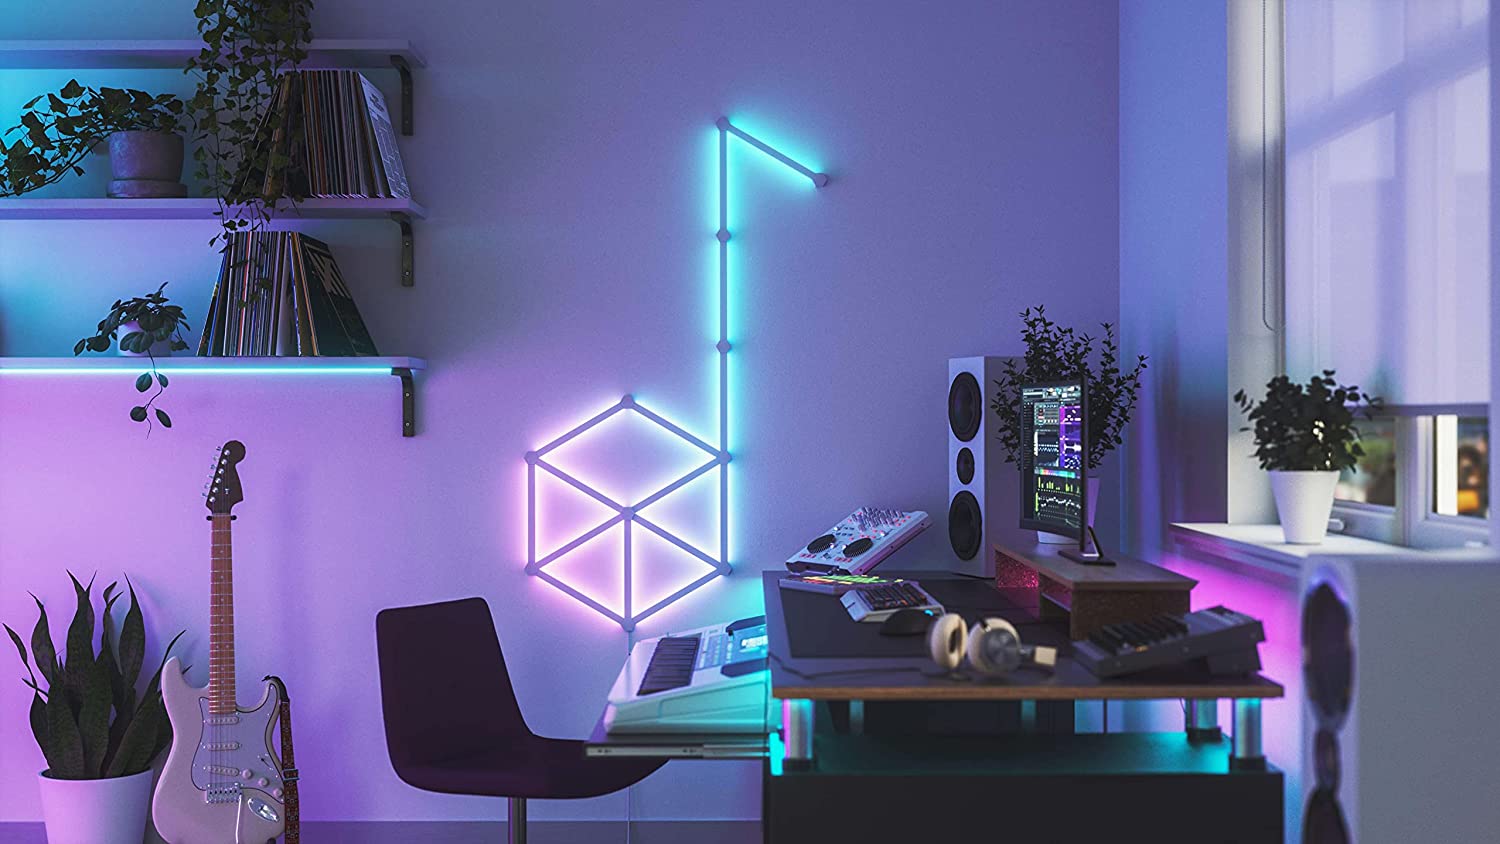 Nanoleaf 60 Degree Lines WiFi Smart LED Lights - 3-Pack Expansion for Gaming and Home Decor - Smart Tech Shopping